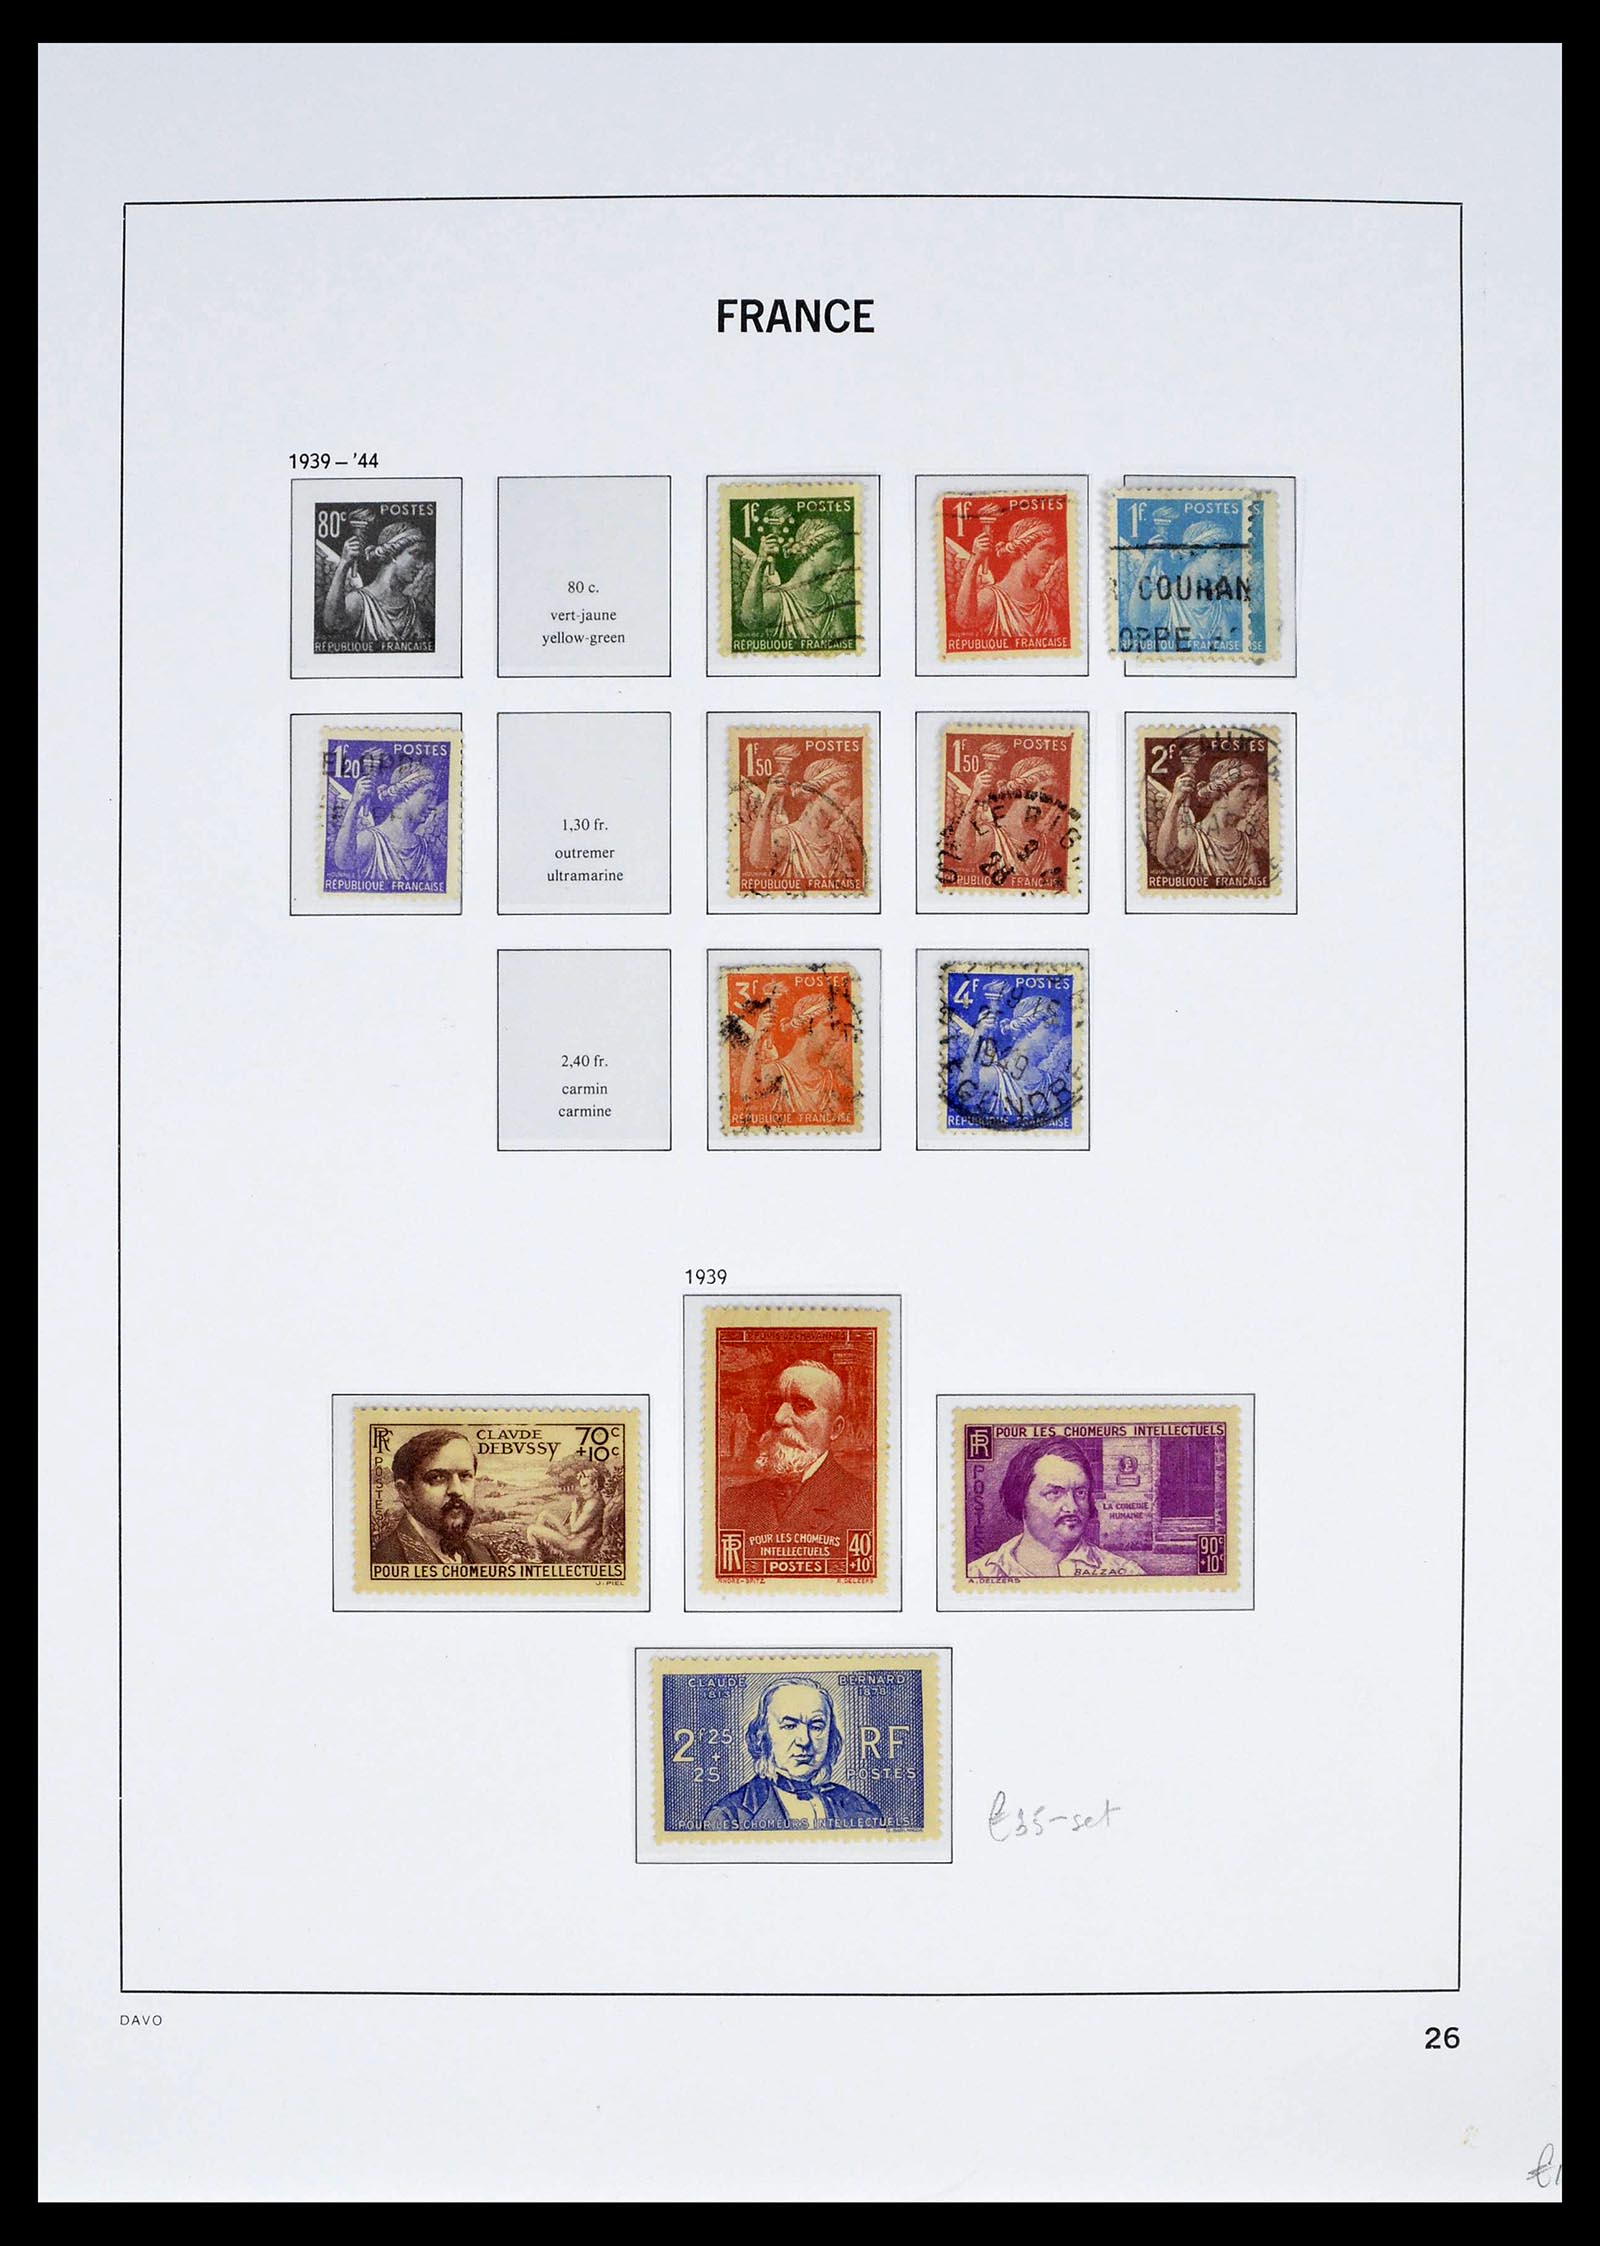 39335 0041 - Stamp collection 39335 France 1849-1969.